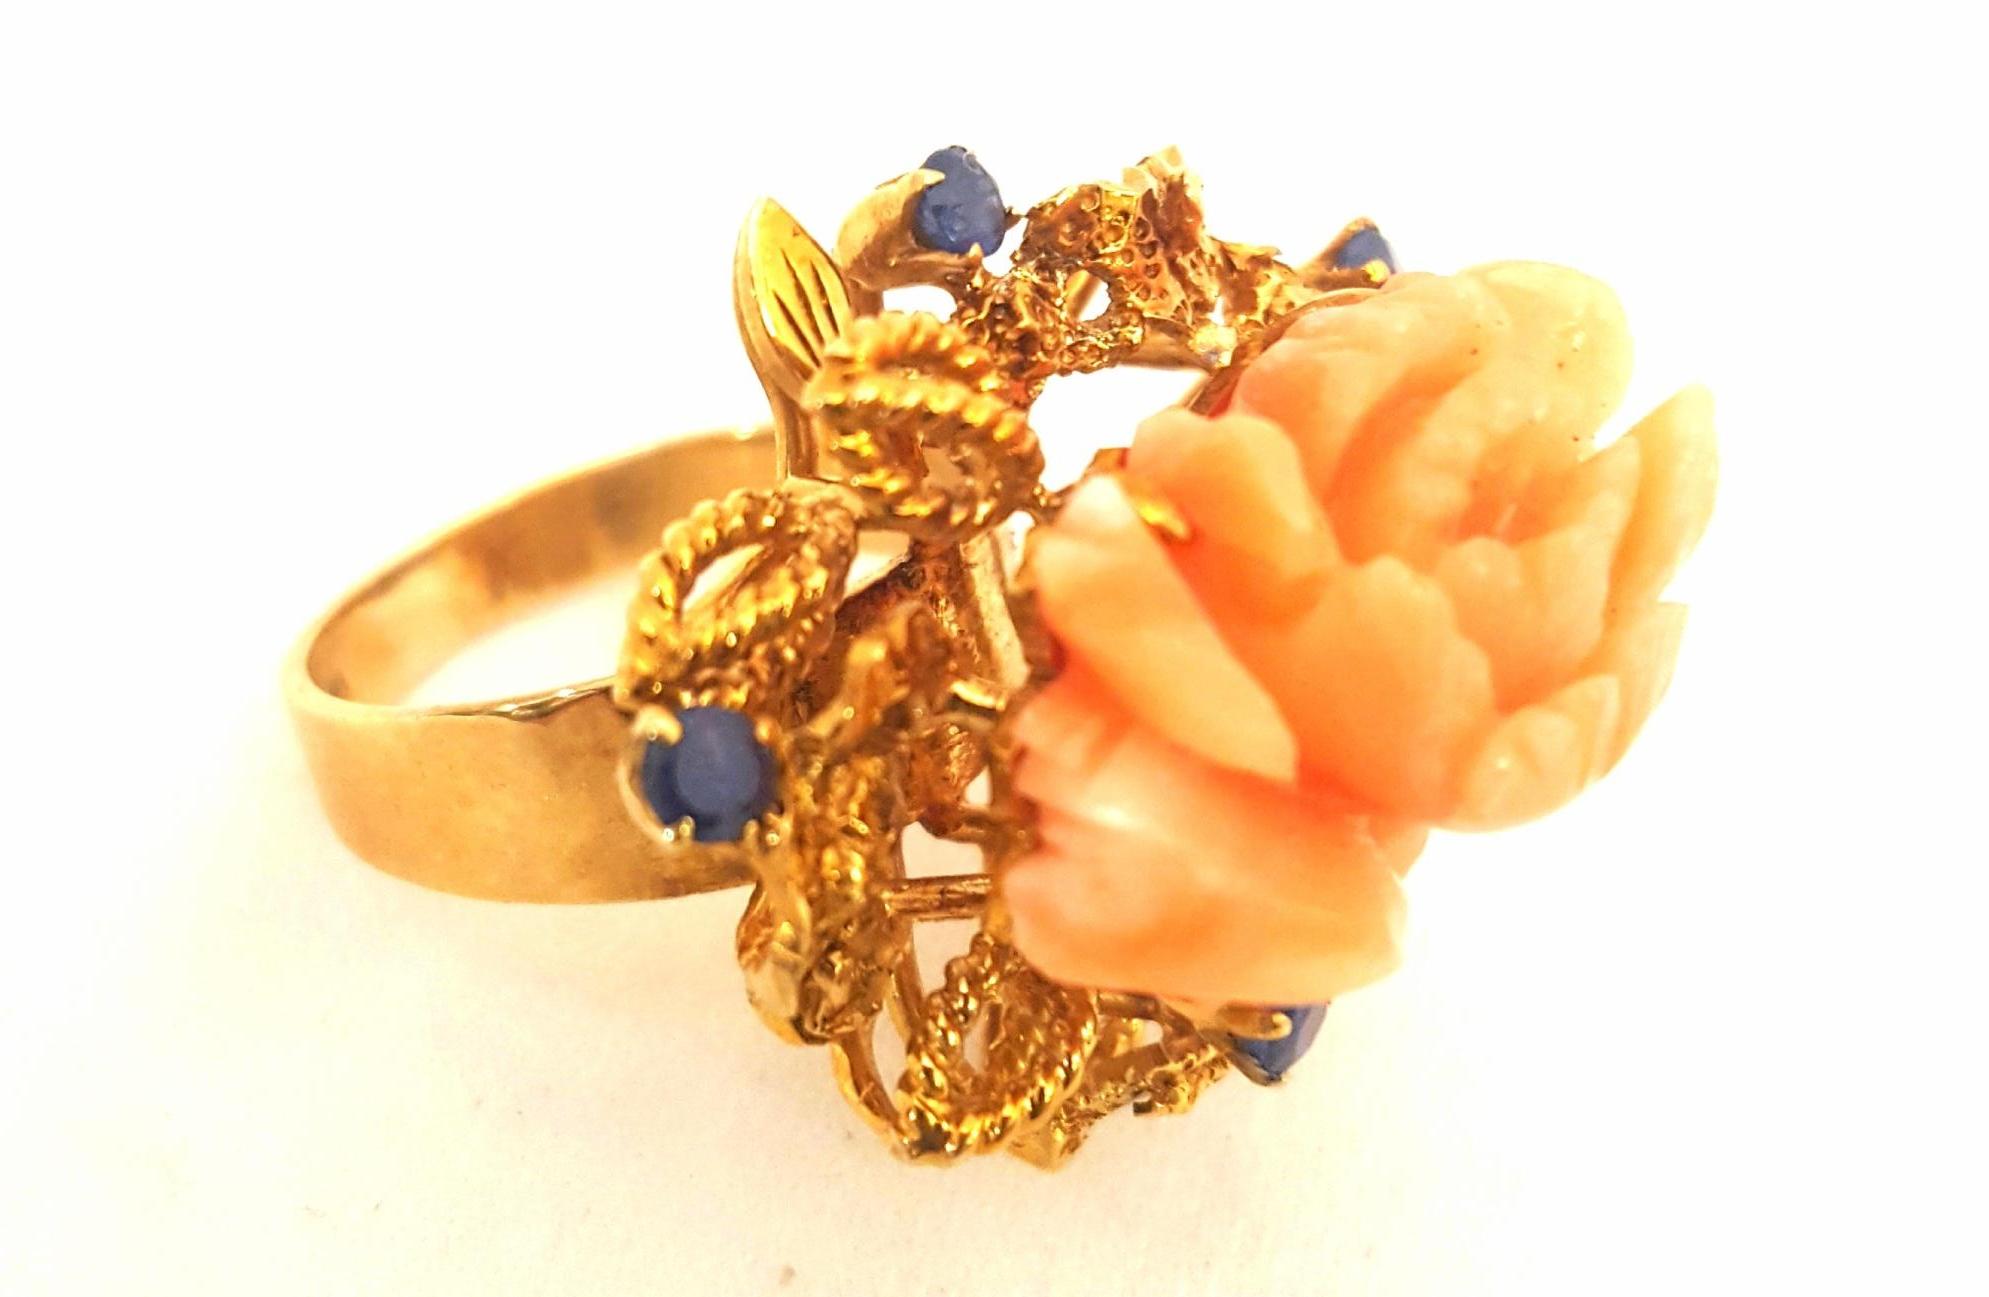 Different and Delightful!  This 14 karat yellow gold ring features a carved, lifelike blooming flower as the focal point.  Seven beautifully matched round faceted prong set sapphires add elegance and interest.  Twisted wire open work leaves and flat